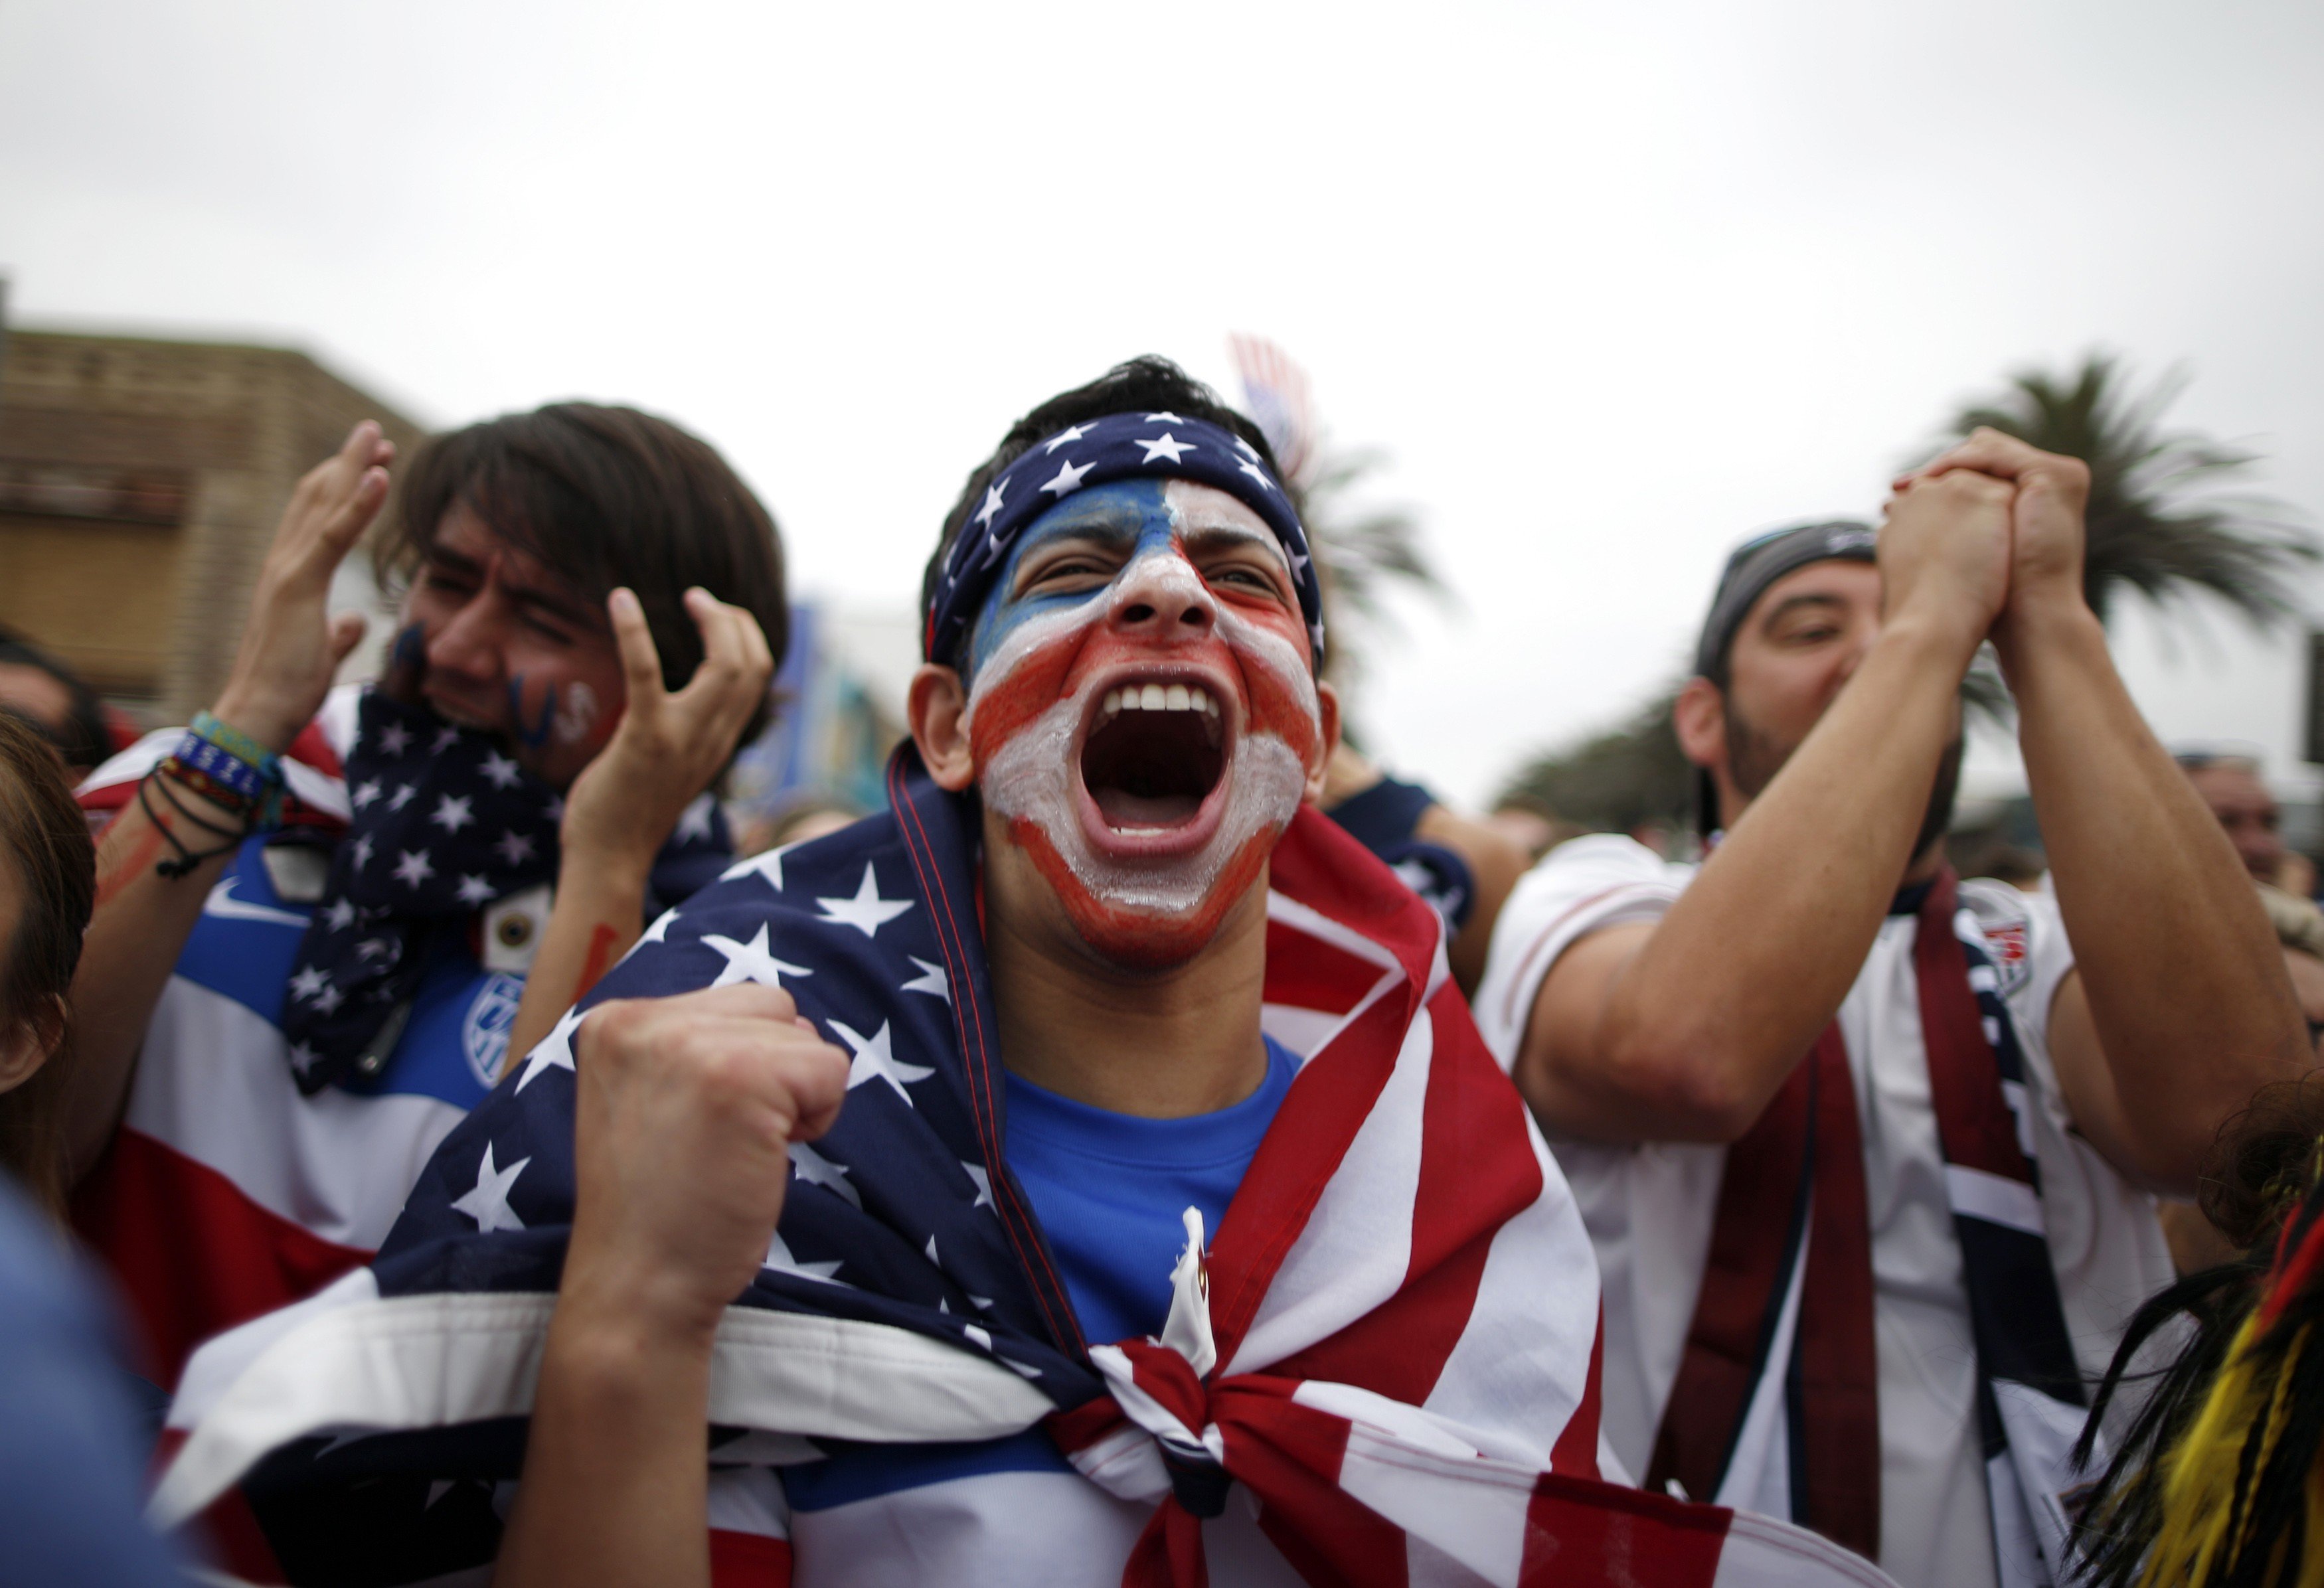 Team U.S.A. fan Gerson Sanchez, 27, during the 2014 World Cup Group G soccer match between Germany and the U.S. at a viewing party in Hermosa Beach, Calif., on June 26, 2014. (Lucy Nicholson—Reuters)